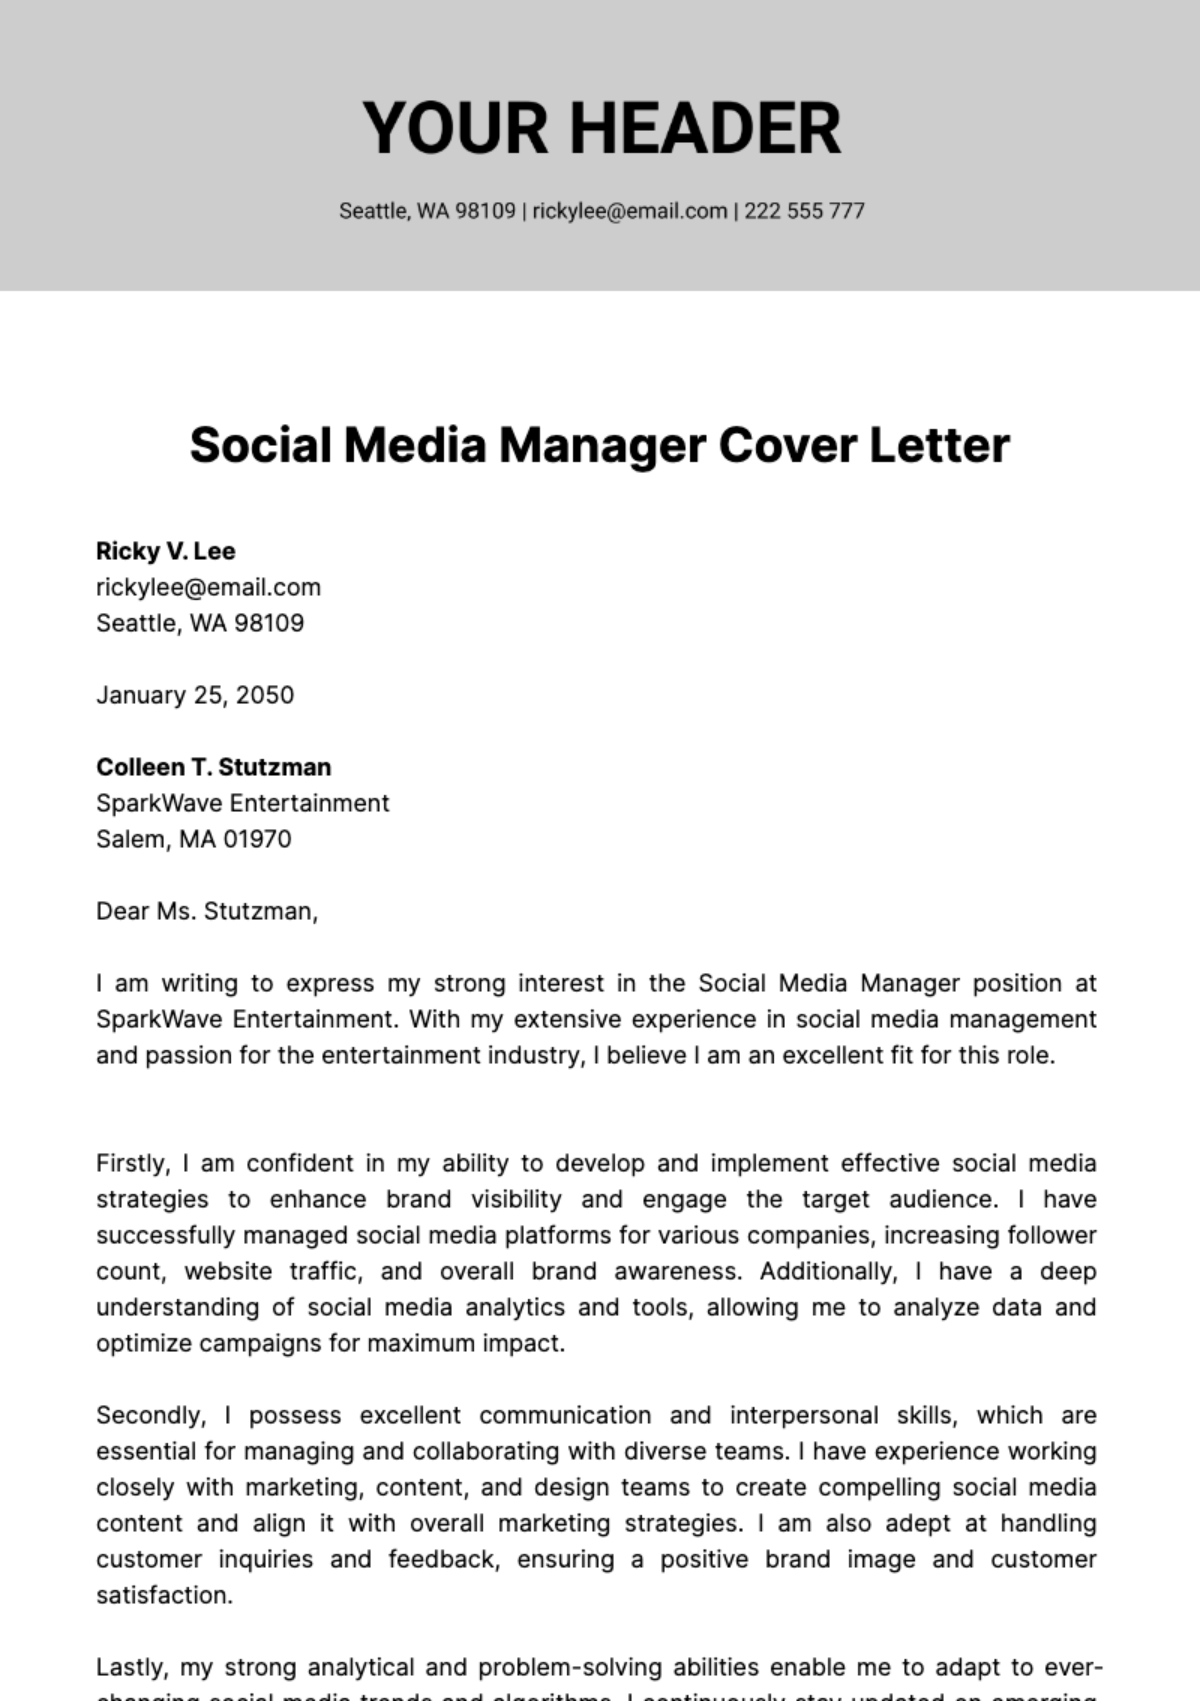 Free Social Media Manager Cover Letter  Template